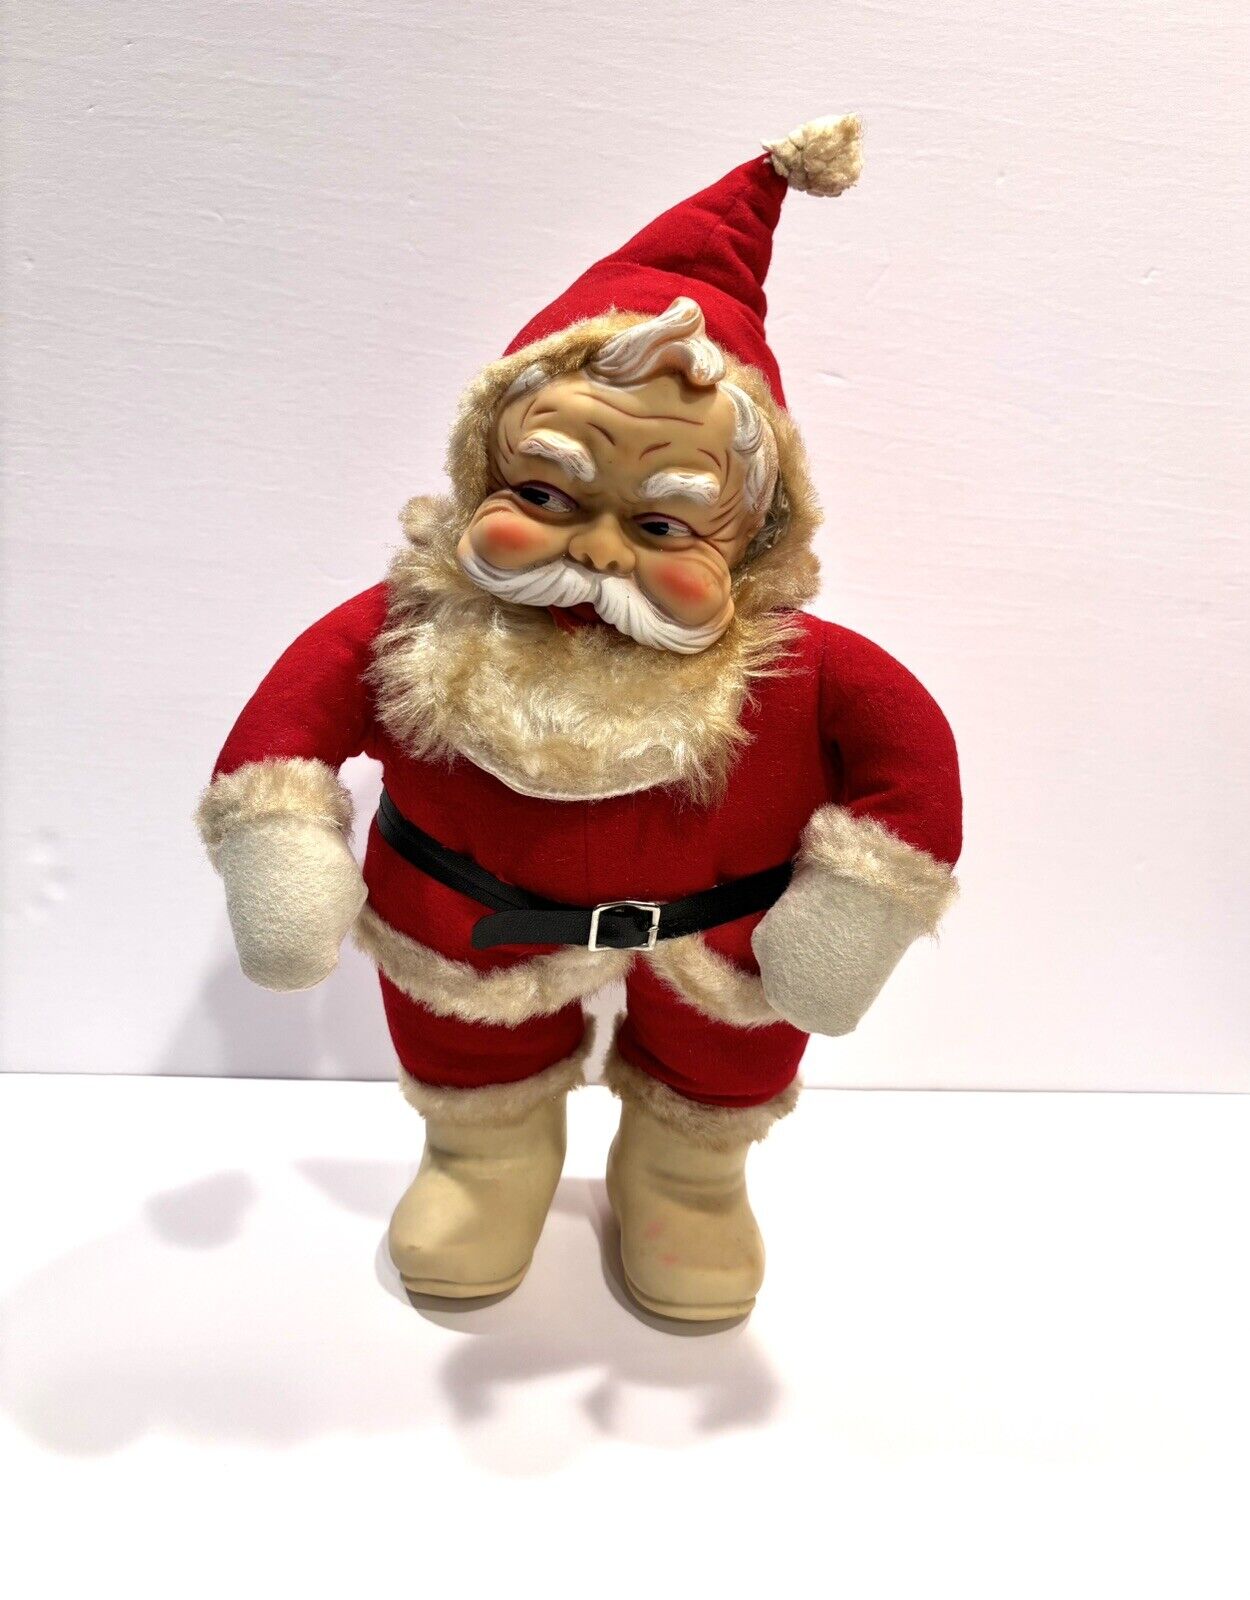 Vintage 15” Rushton Santa Claus Plush Christmas Doll Rubber Face and Boots